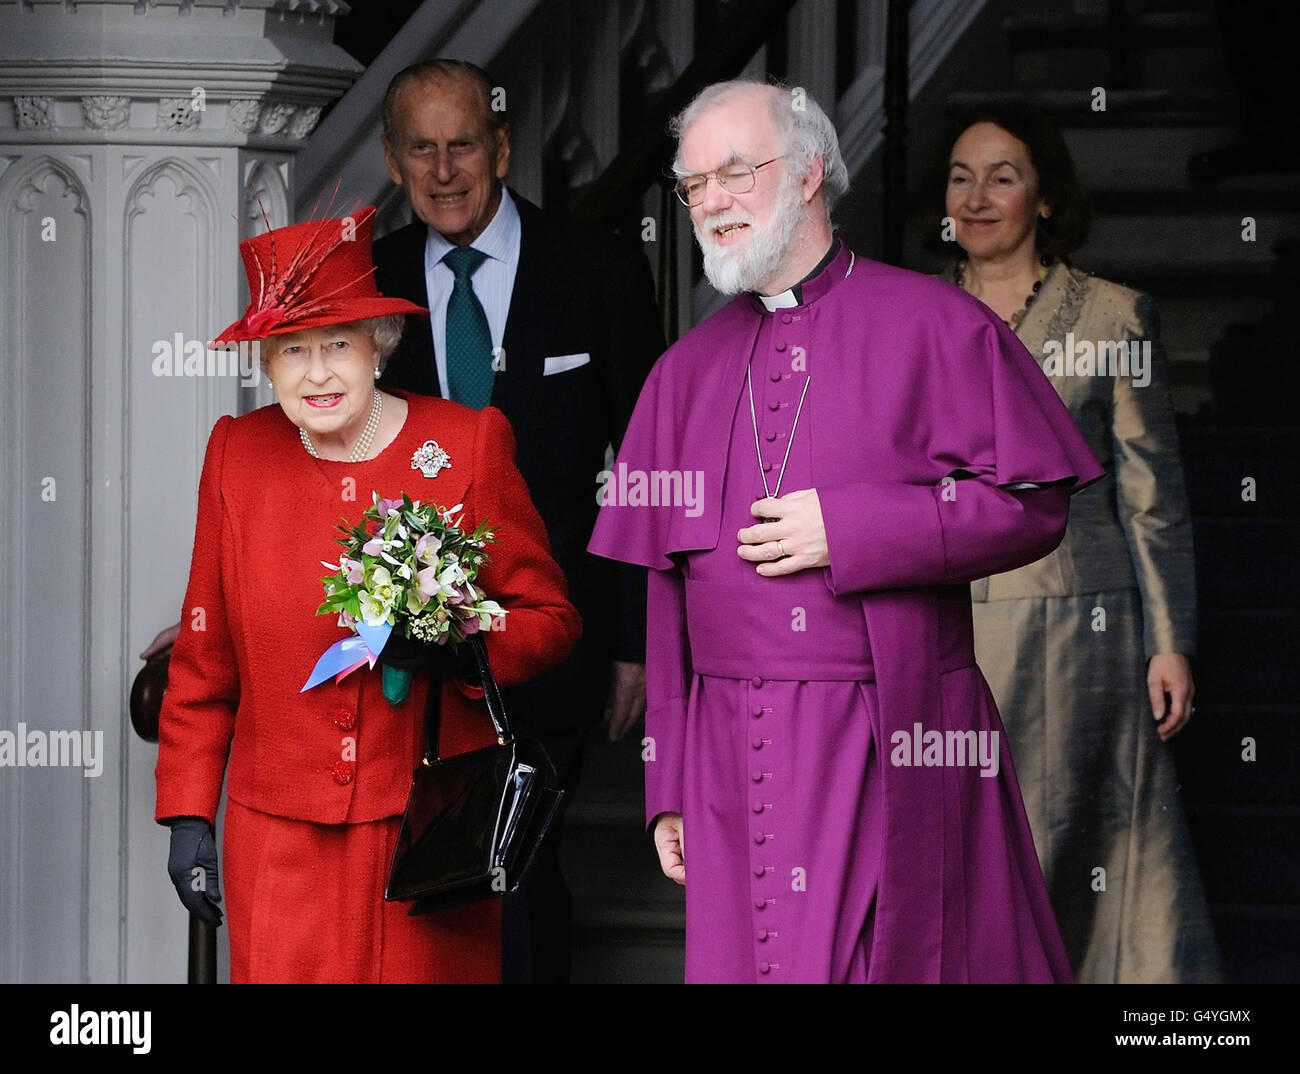 Queen Elizabeth Ii And The Archbishop Of Canterbury Dr Rowan Williams Leave Lambeth Palace In